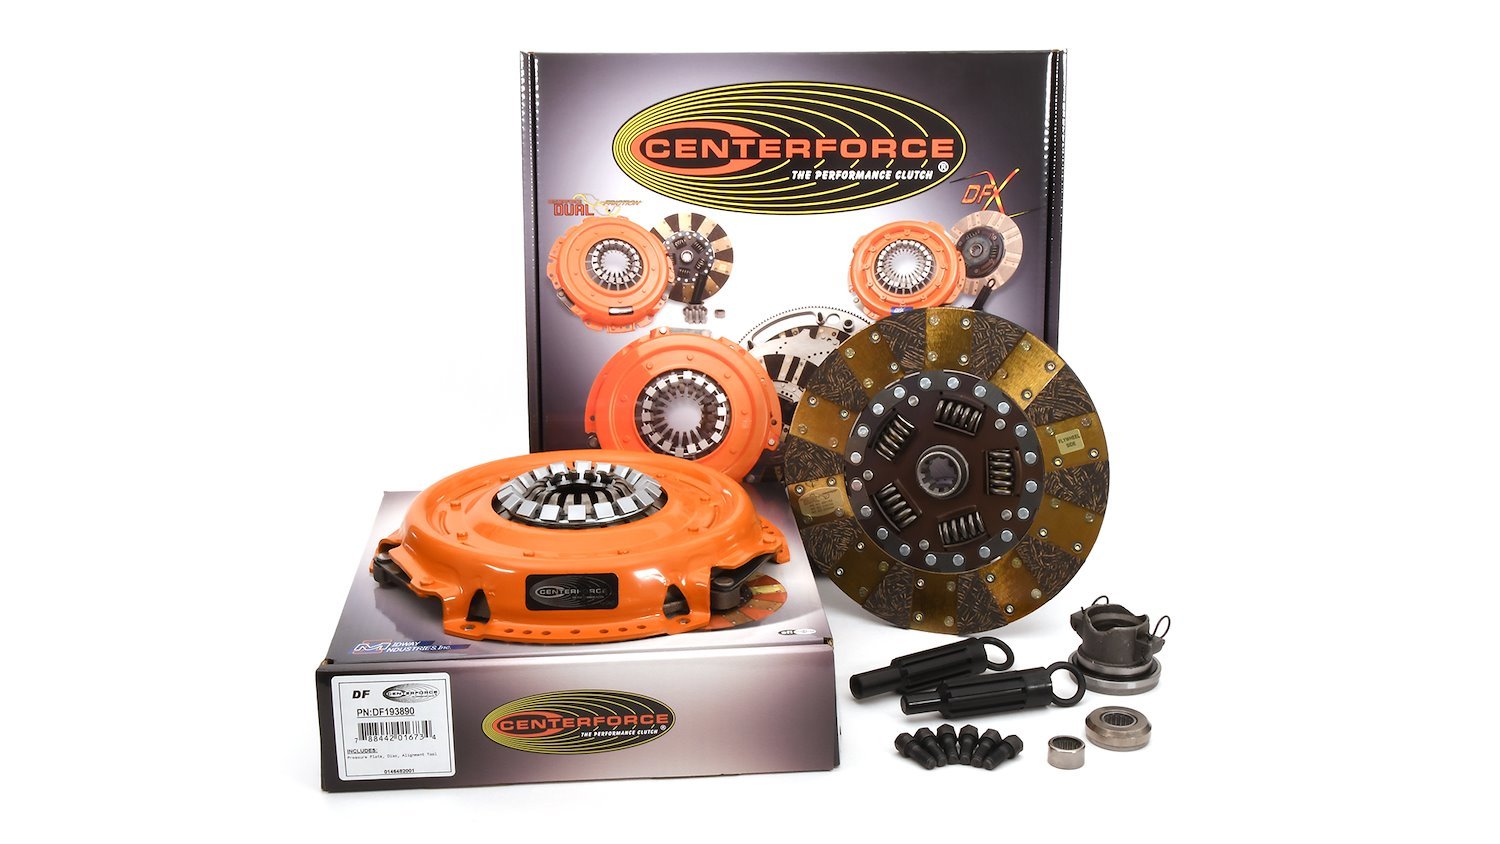 KDF939064 Dual Friction Clutch Kit for 1994-2006 Jeep Wrangler, Cherokee w/4.0L Inline 6-Cylinder Engine